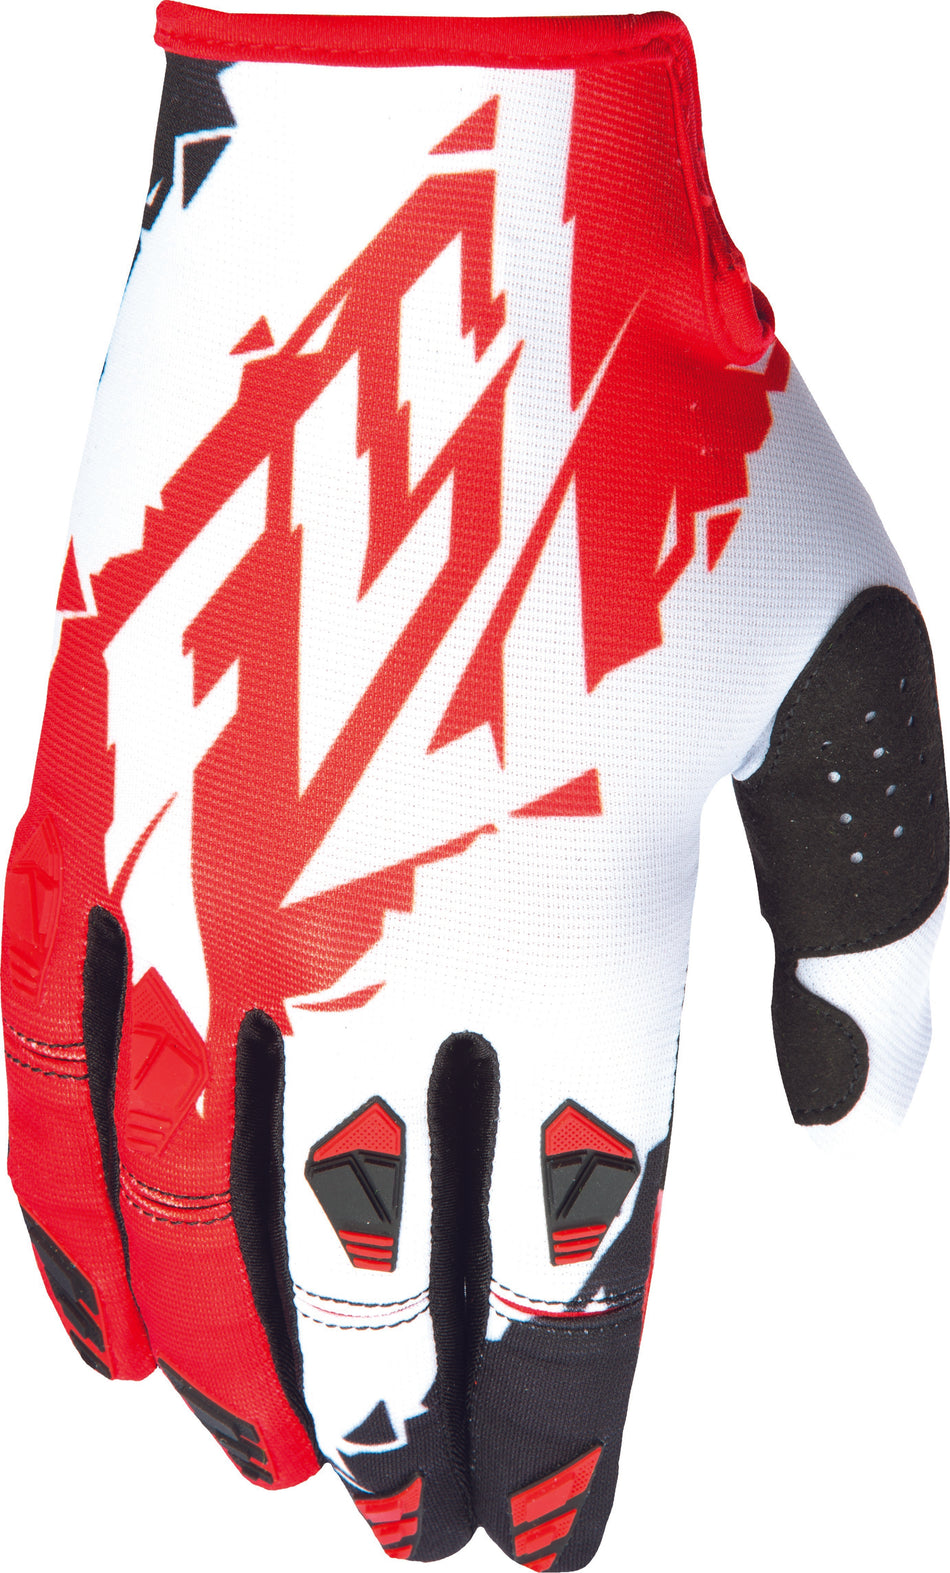 FLY RACING Kinetic Glove Red/White Sz 8 S 370-41408